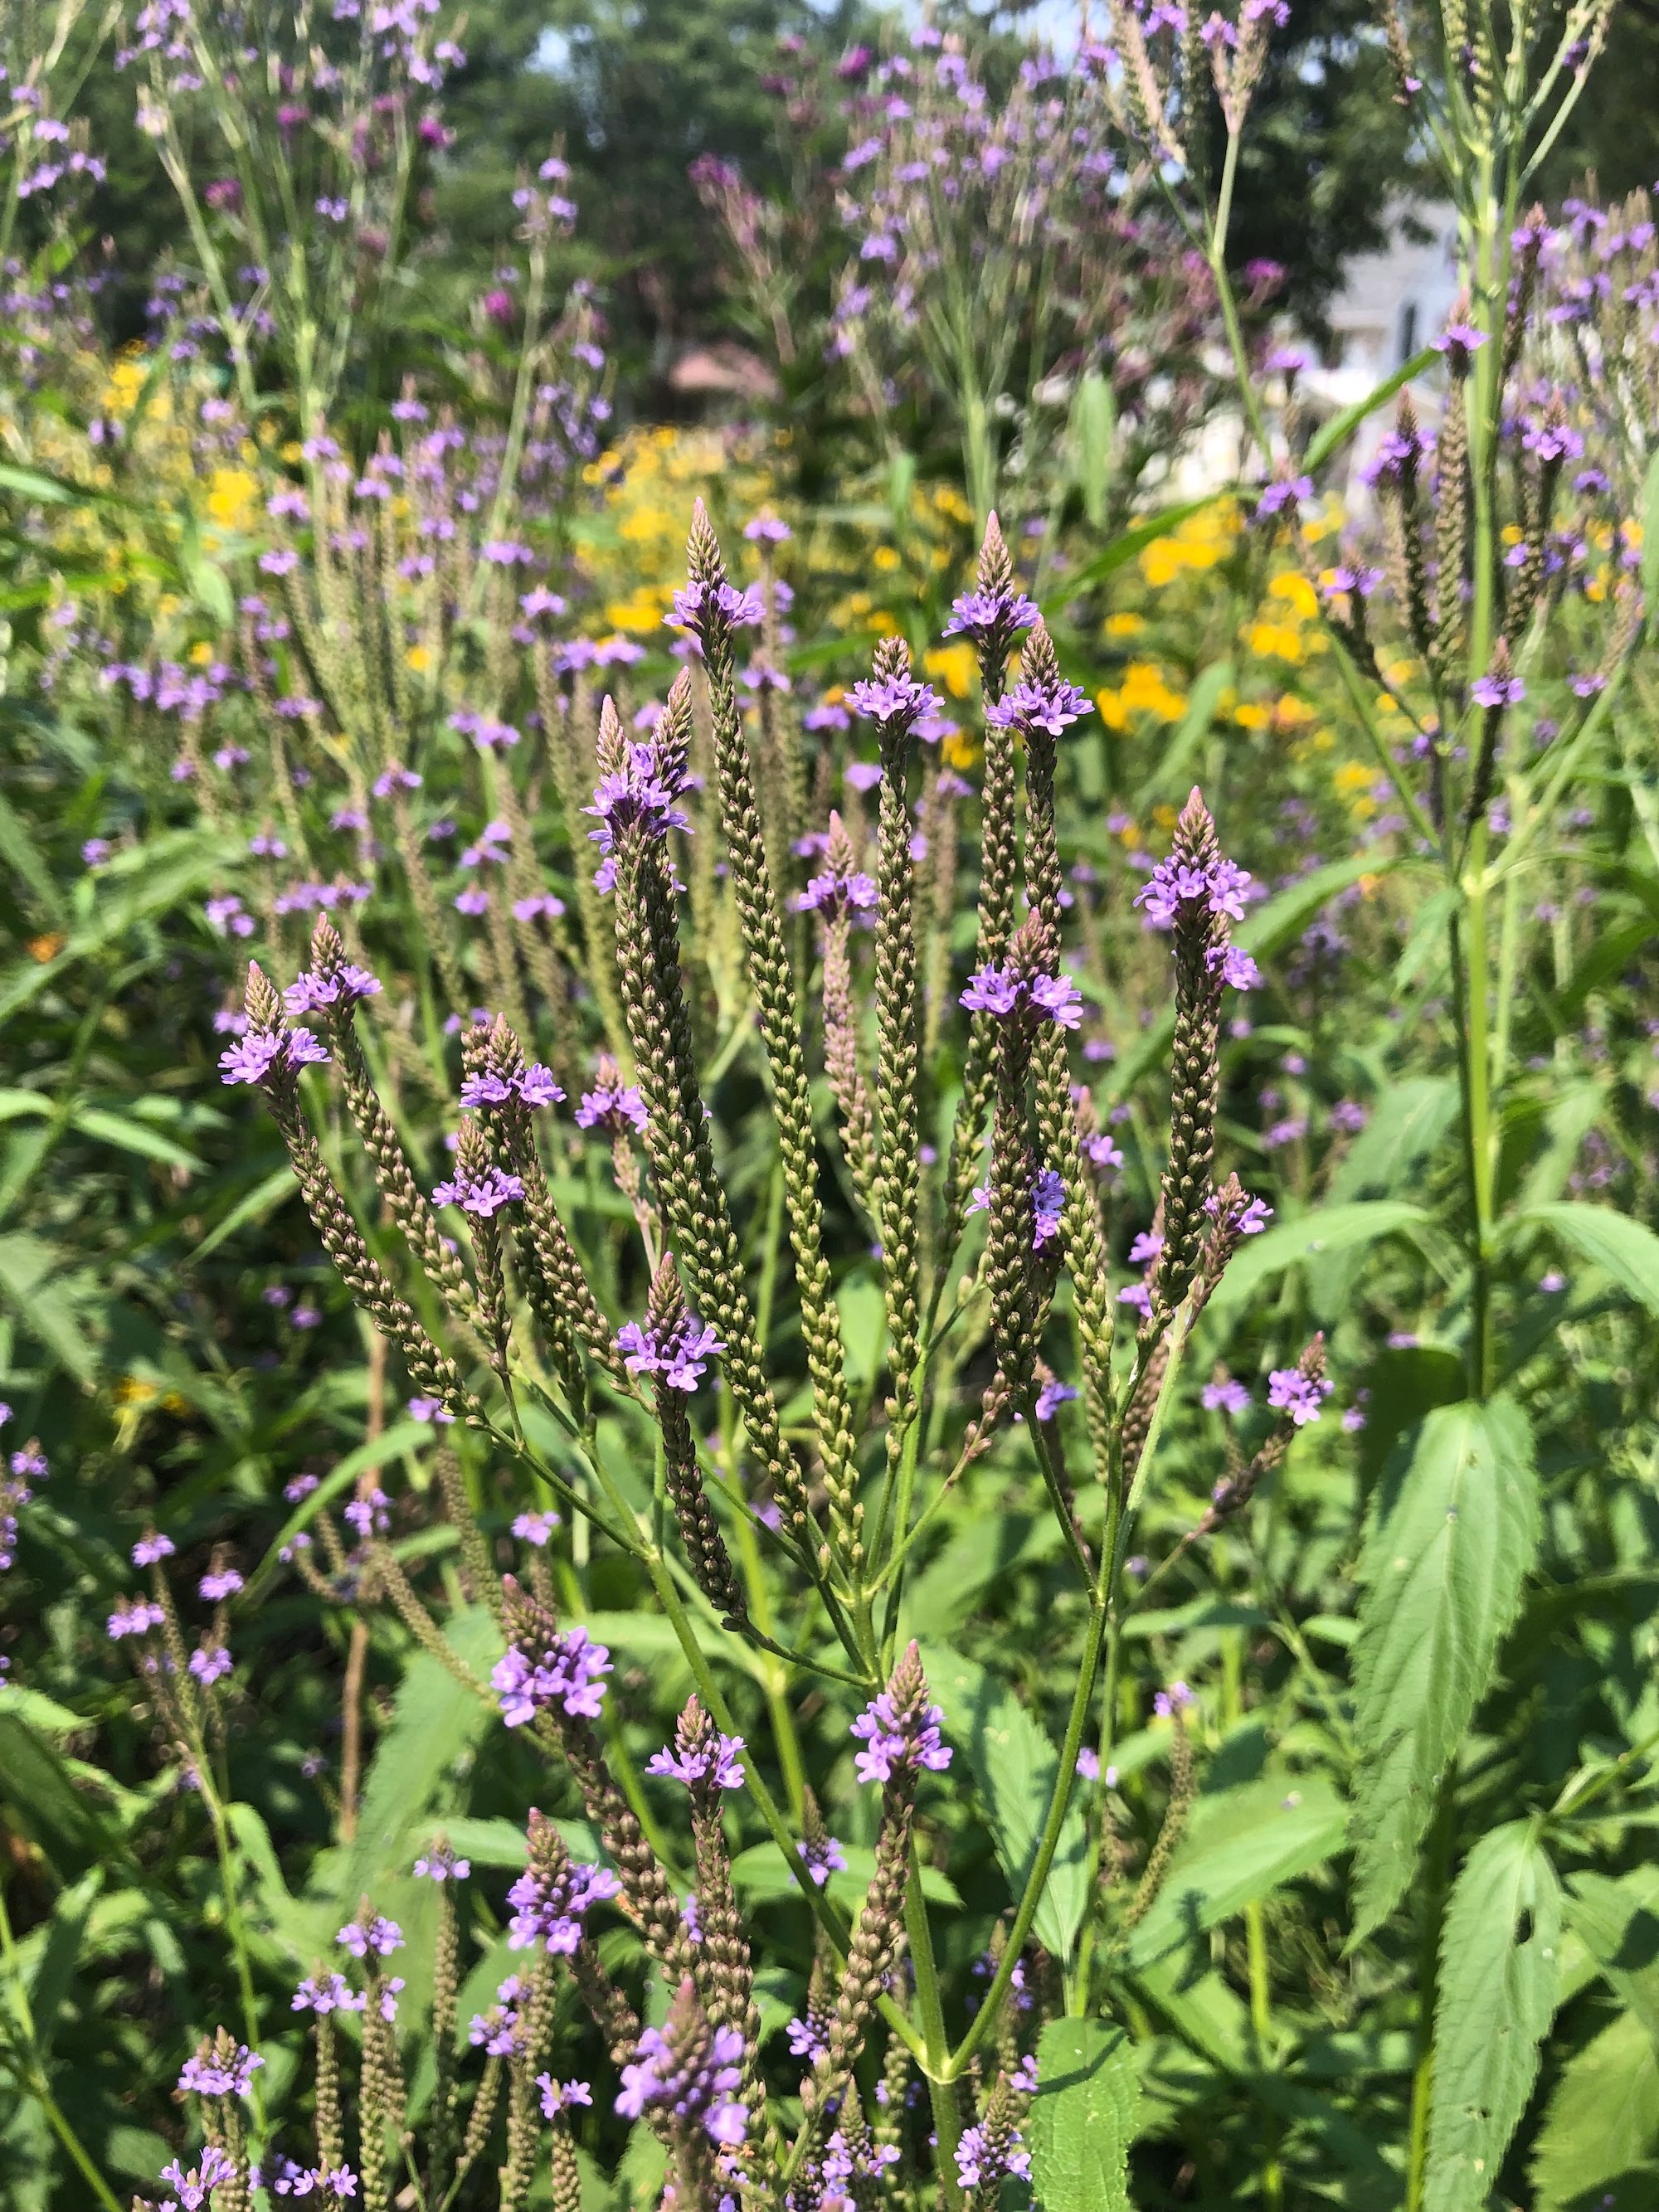 Blue Vervain along Gregory Street Bike Path in Madison, Wisconsin on August, 2021.